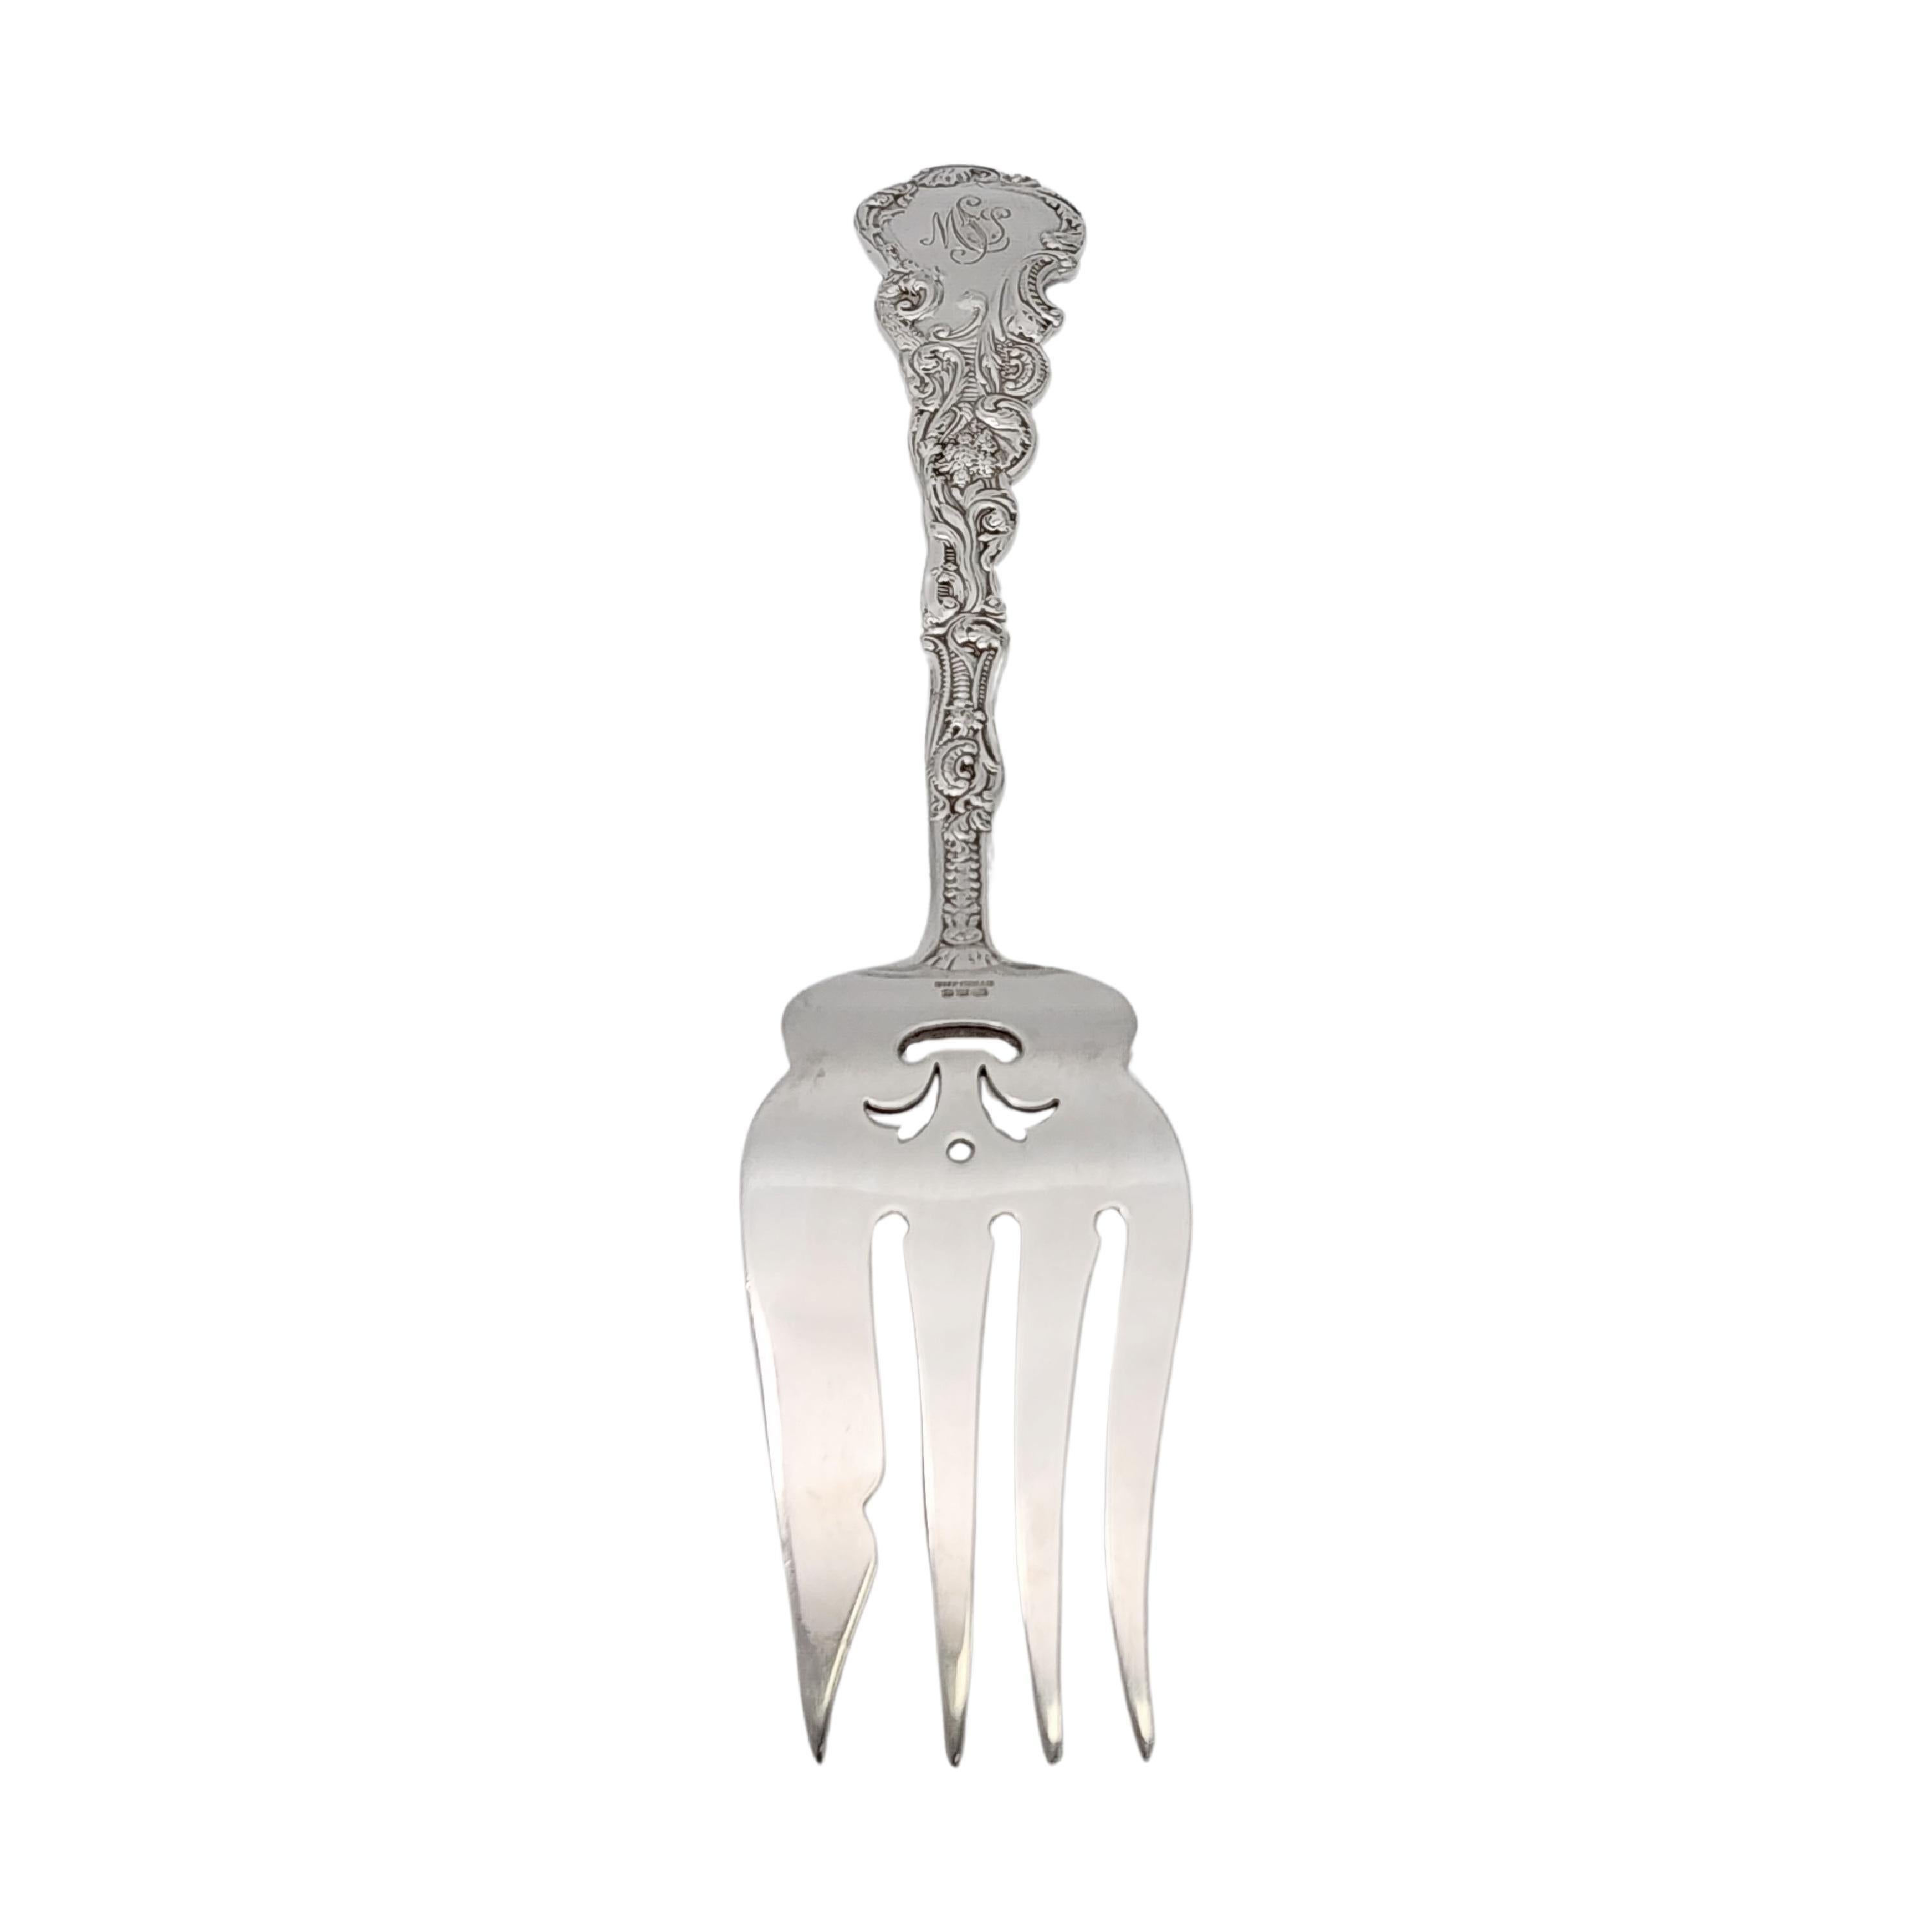 Sterling silver small cold meat serving fork in the Versailles pattern by Gorham.

Monogram appears to be MSJ (see photo).

Gorham's Versailles is a multi motif pattern designed by Antoine Heller in 1885. Named for the Palace of Versailles, the